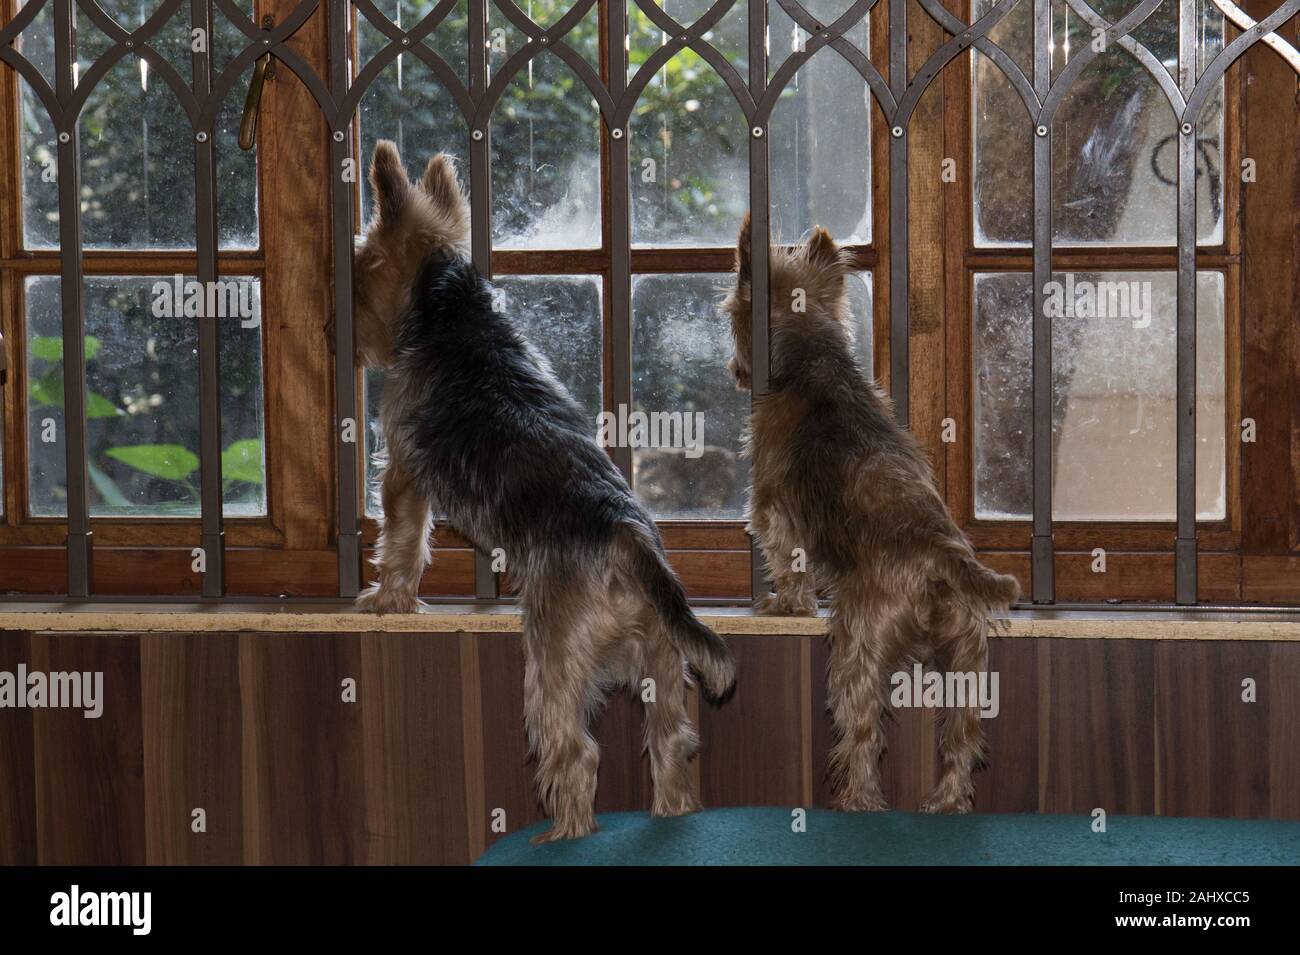 Two small dogs standing on their hind legs on a sofa looking through a window to the outside image in horizontal format Stock Photo